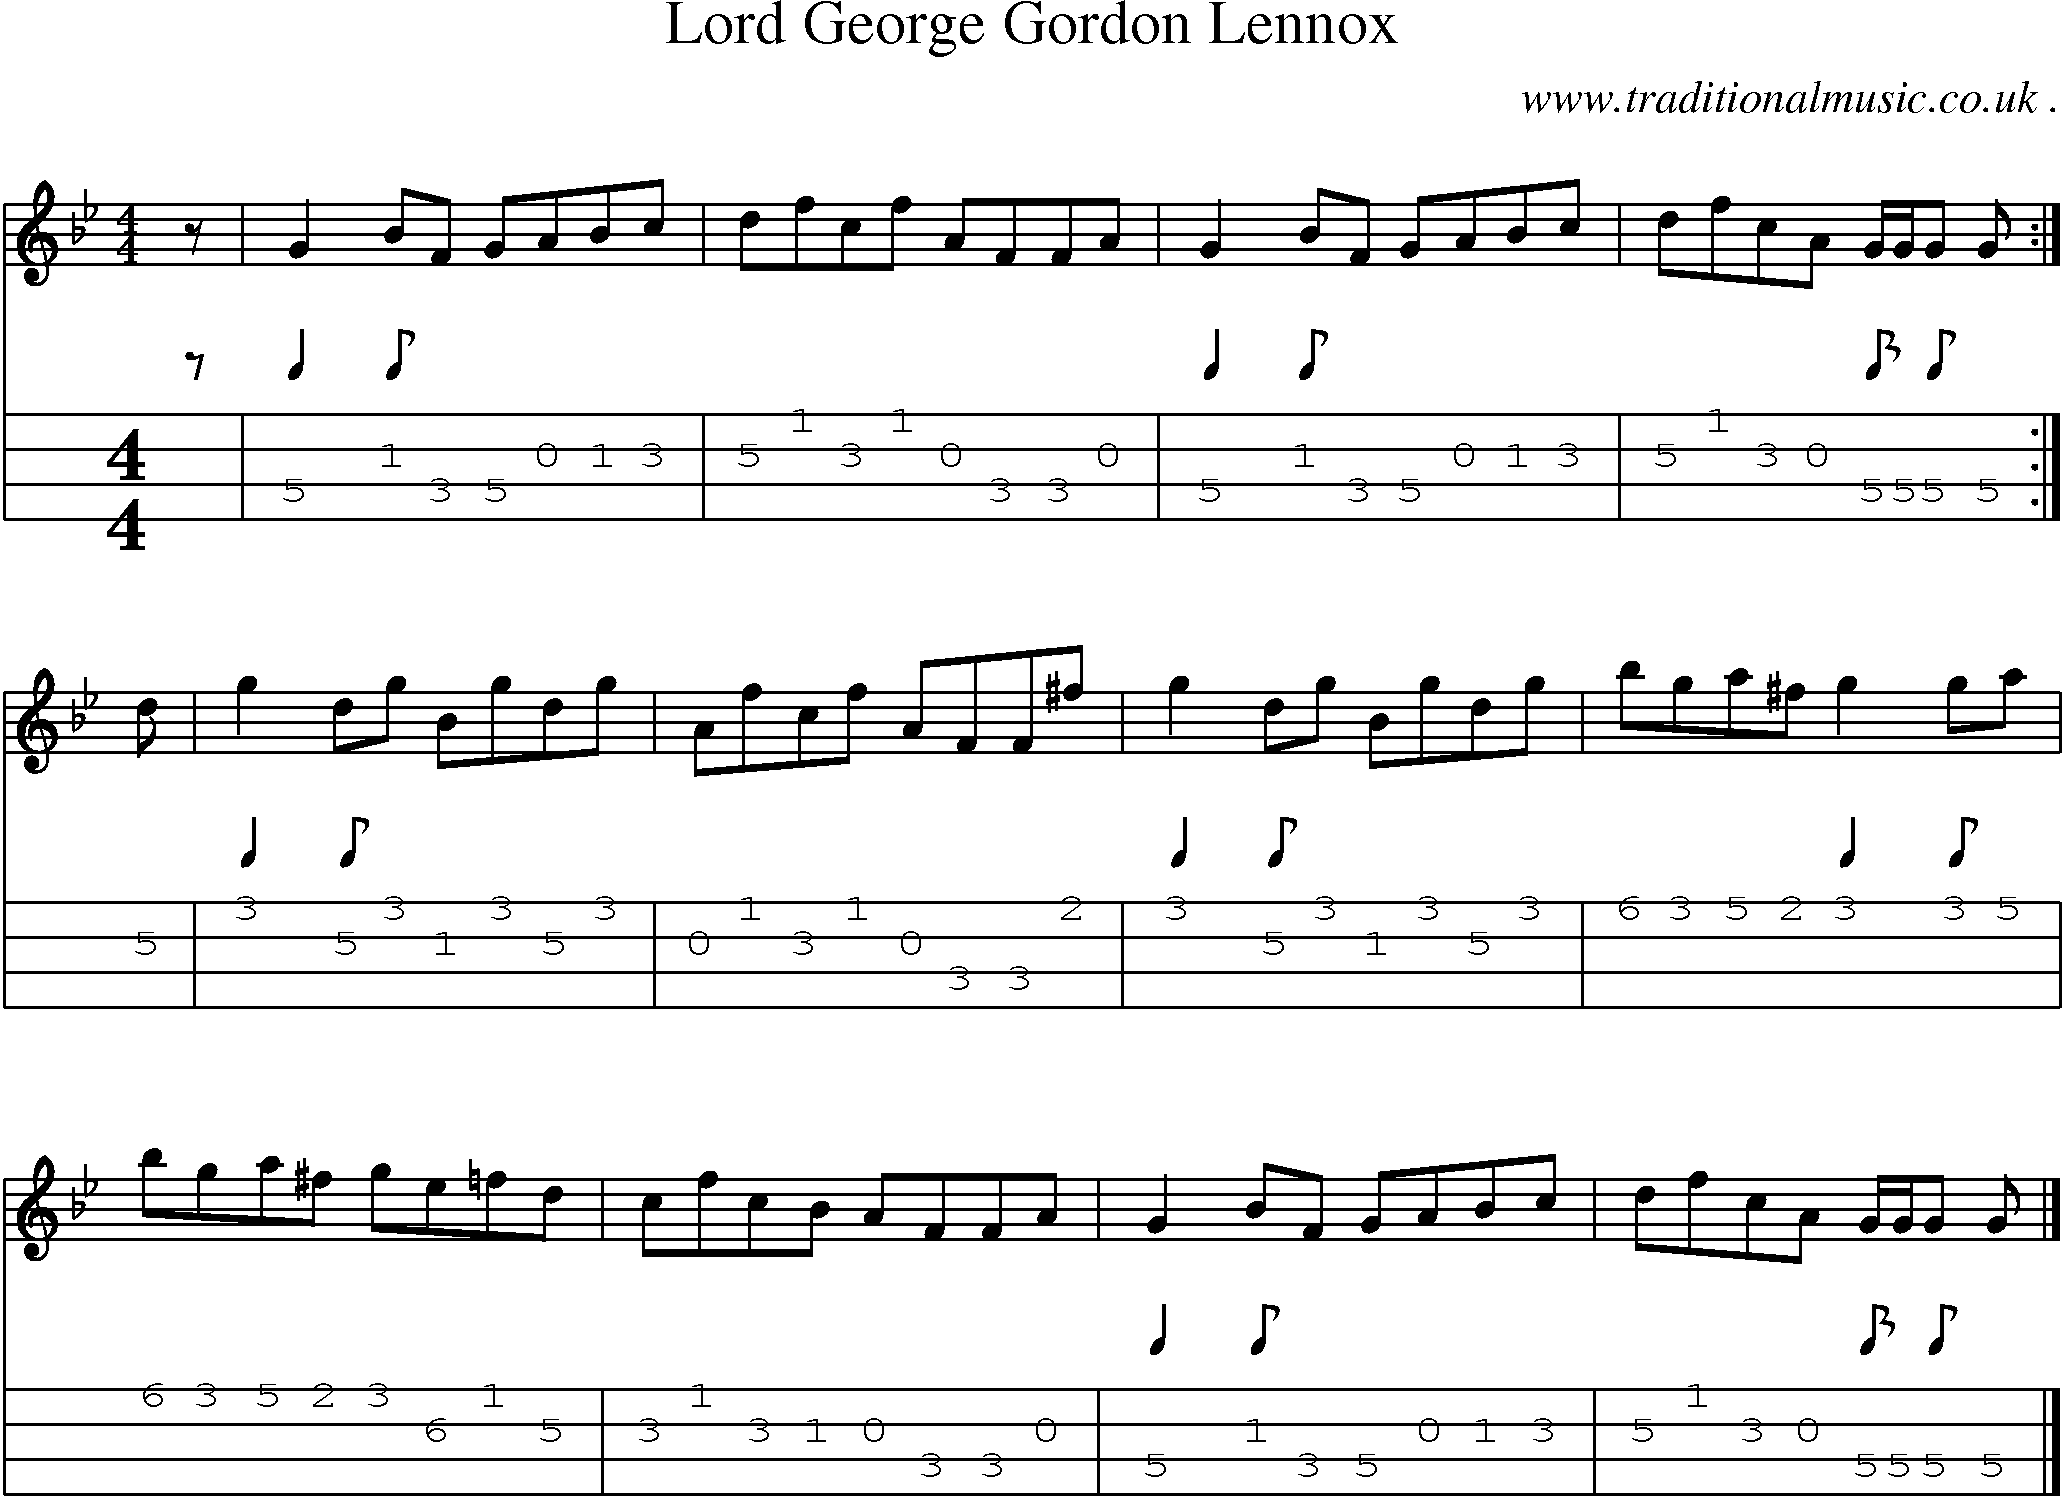 Sheet-music  score, Chords and Mandolin Tabs for Lord George Gordon Lennox